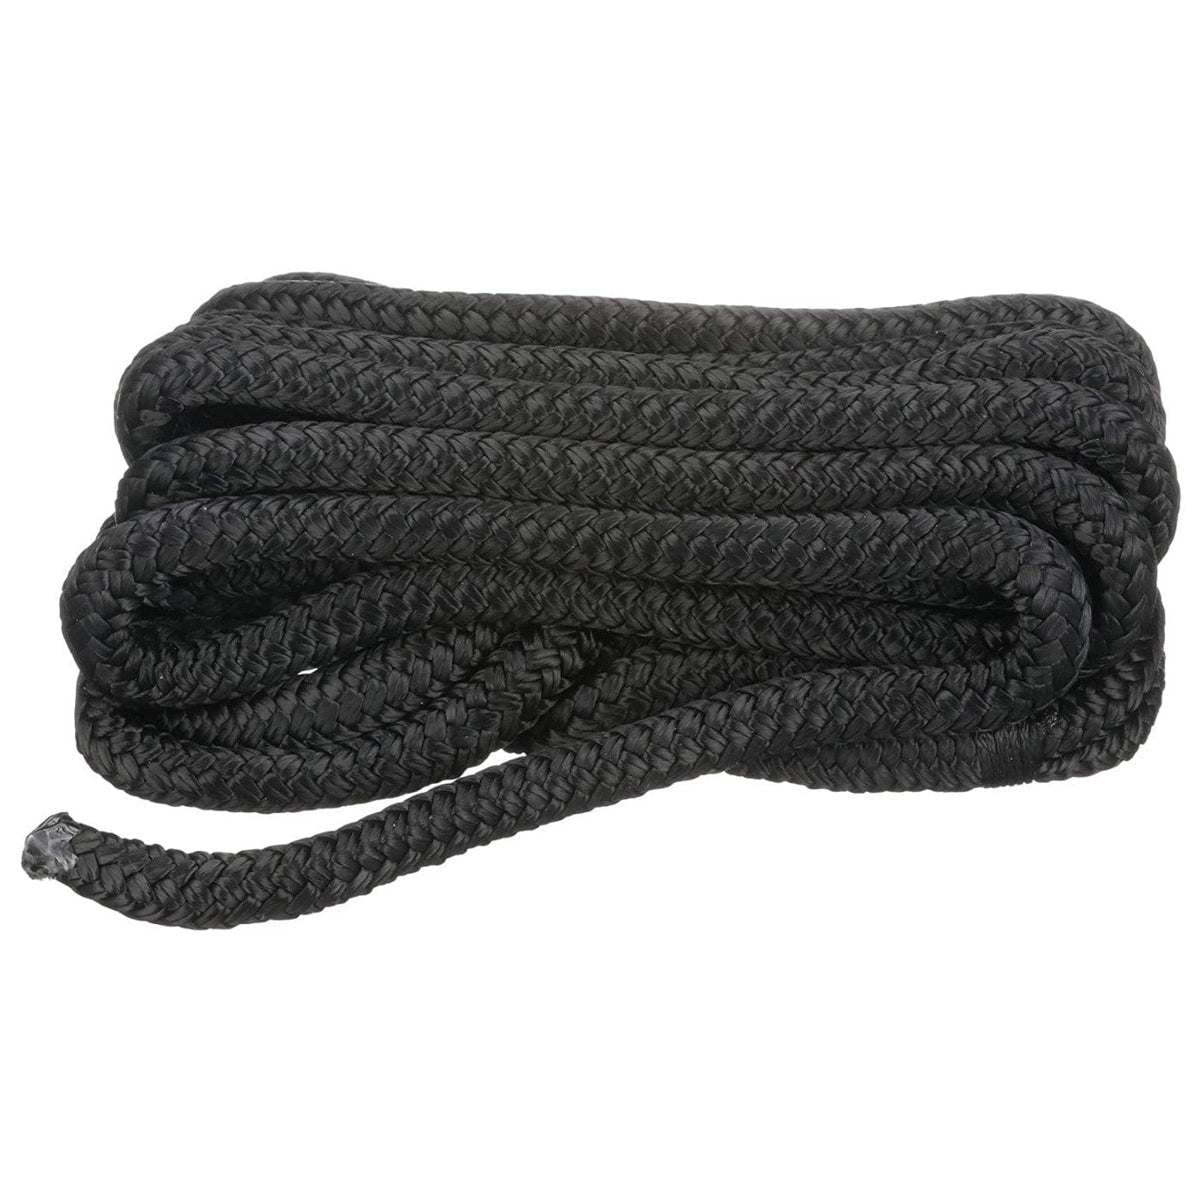 Attwood Marine Qualifies for Free Shipping Attwood 1/2" x 20' Double Braided Nylon #117617-7